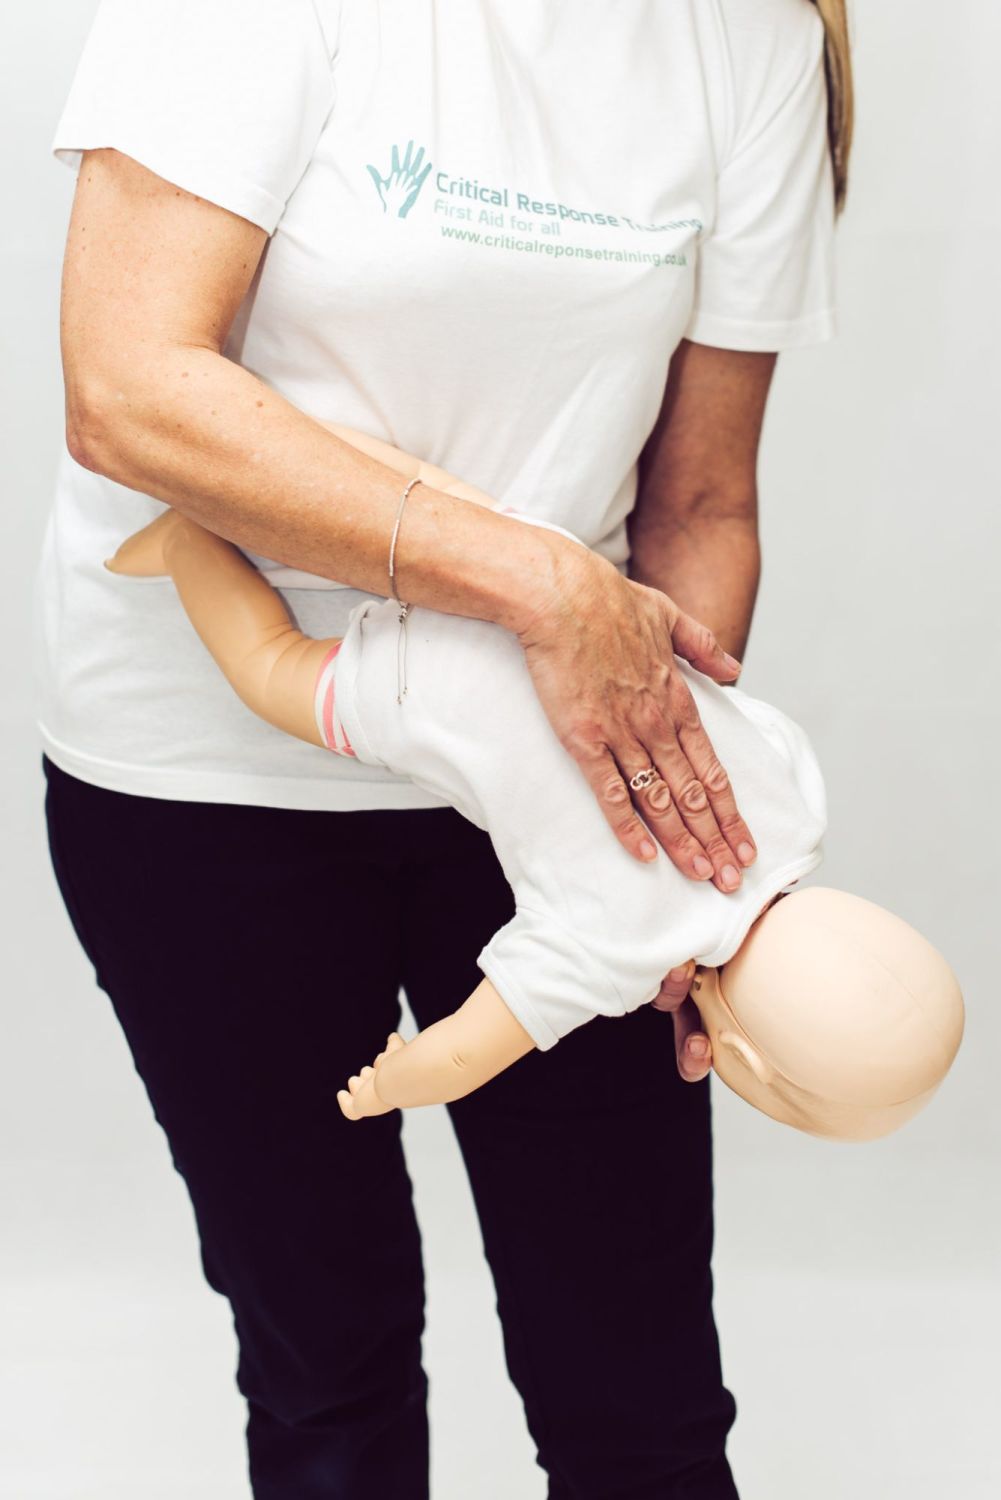 6-hour Paediatric First Aid course : Tuesday 9th May2023